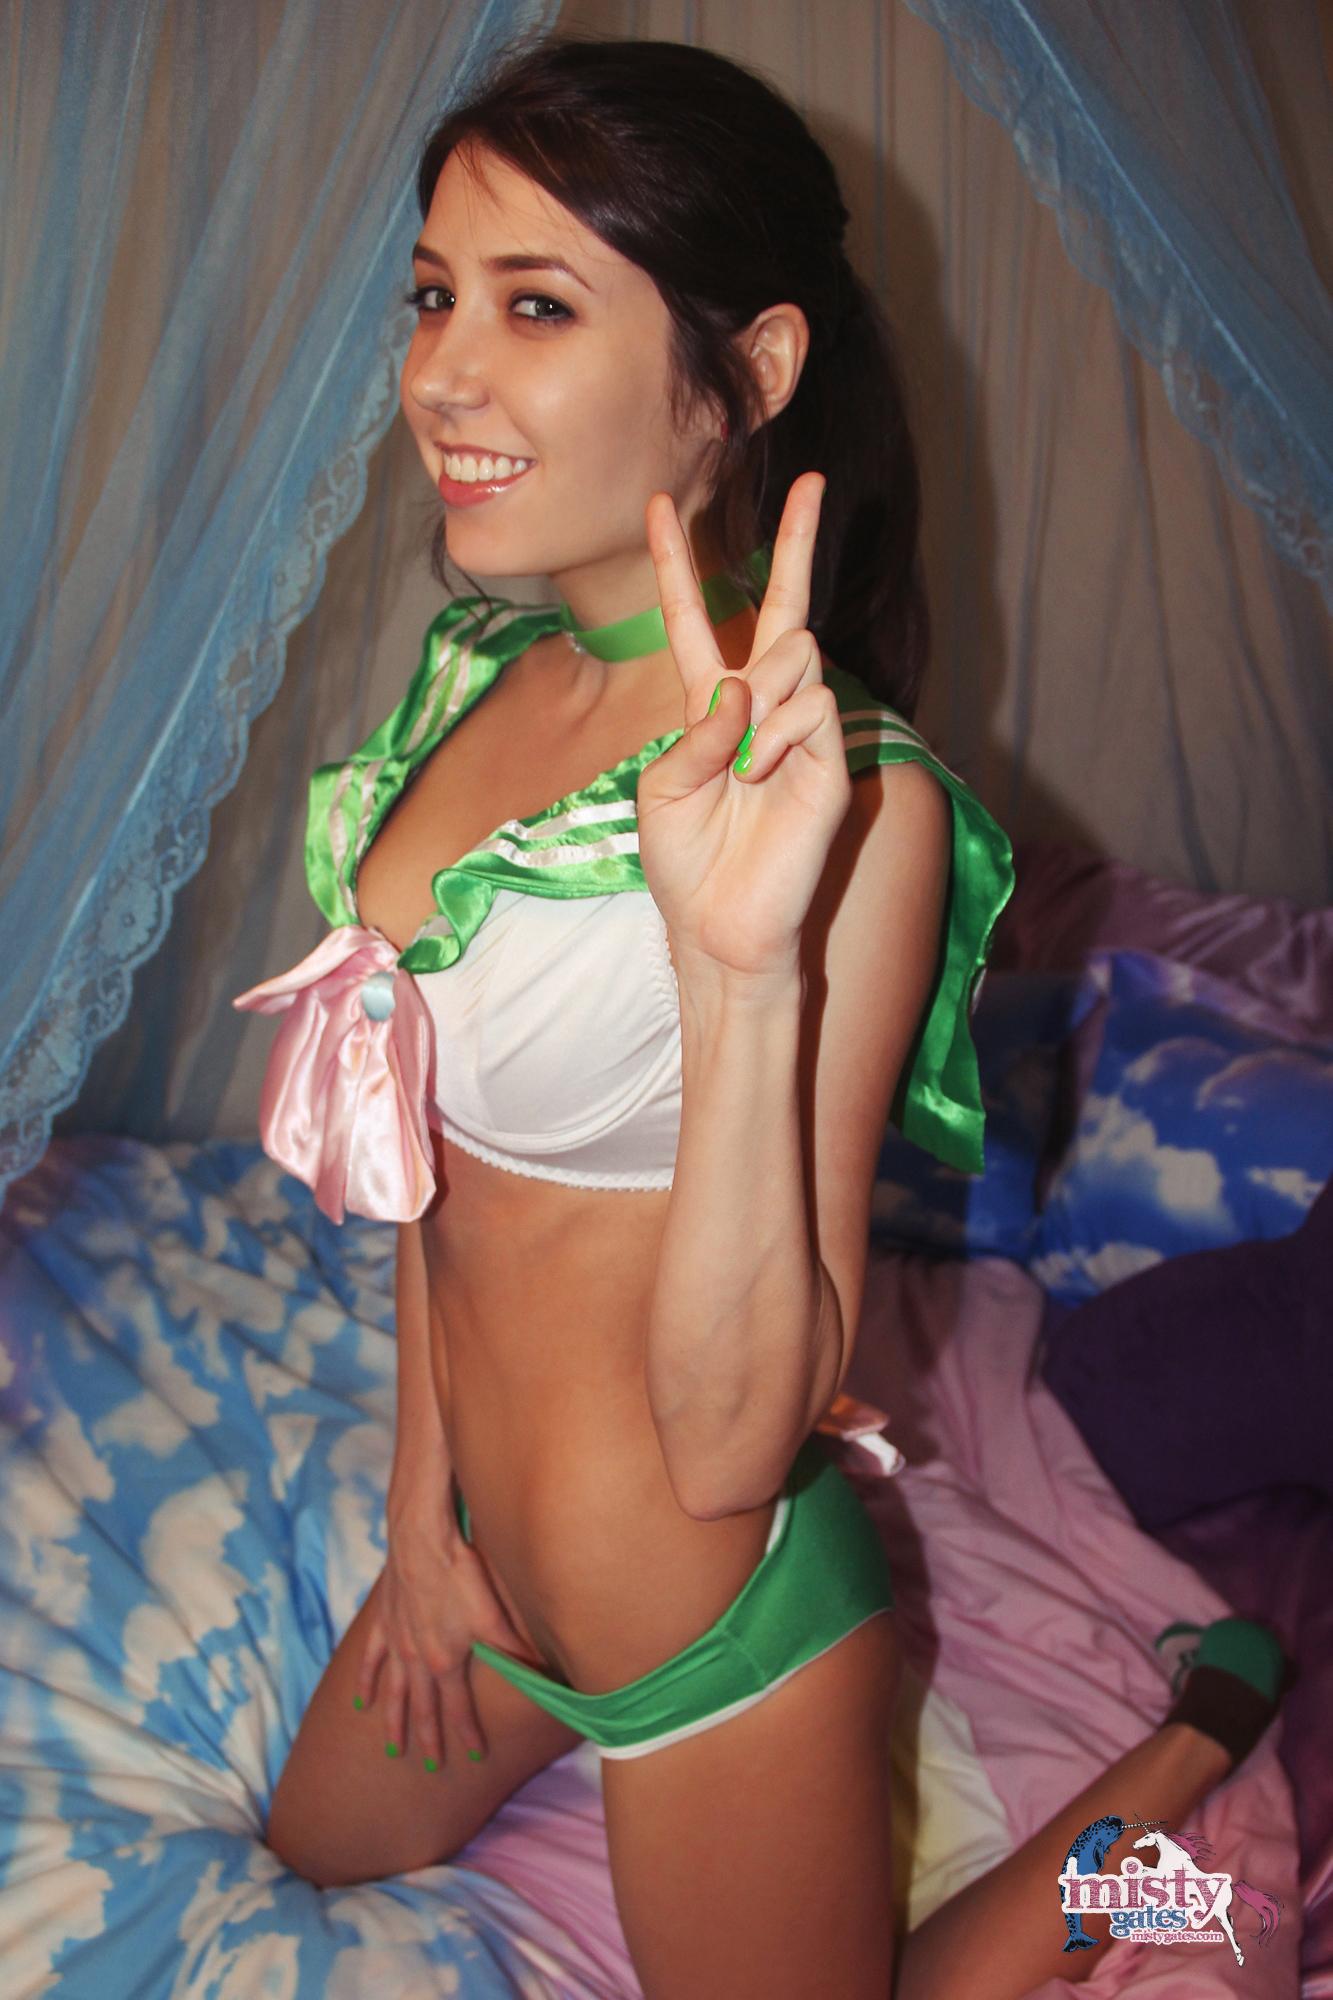 Misty does some fun cosplay as Sailor Jupiter in the bedroom #59590217